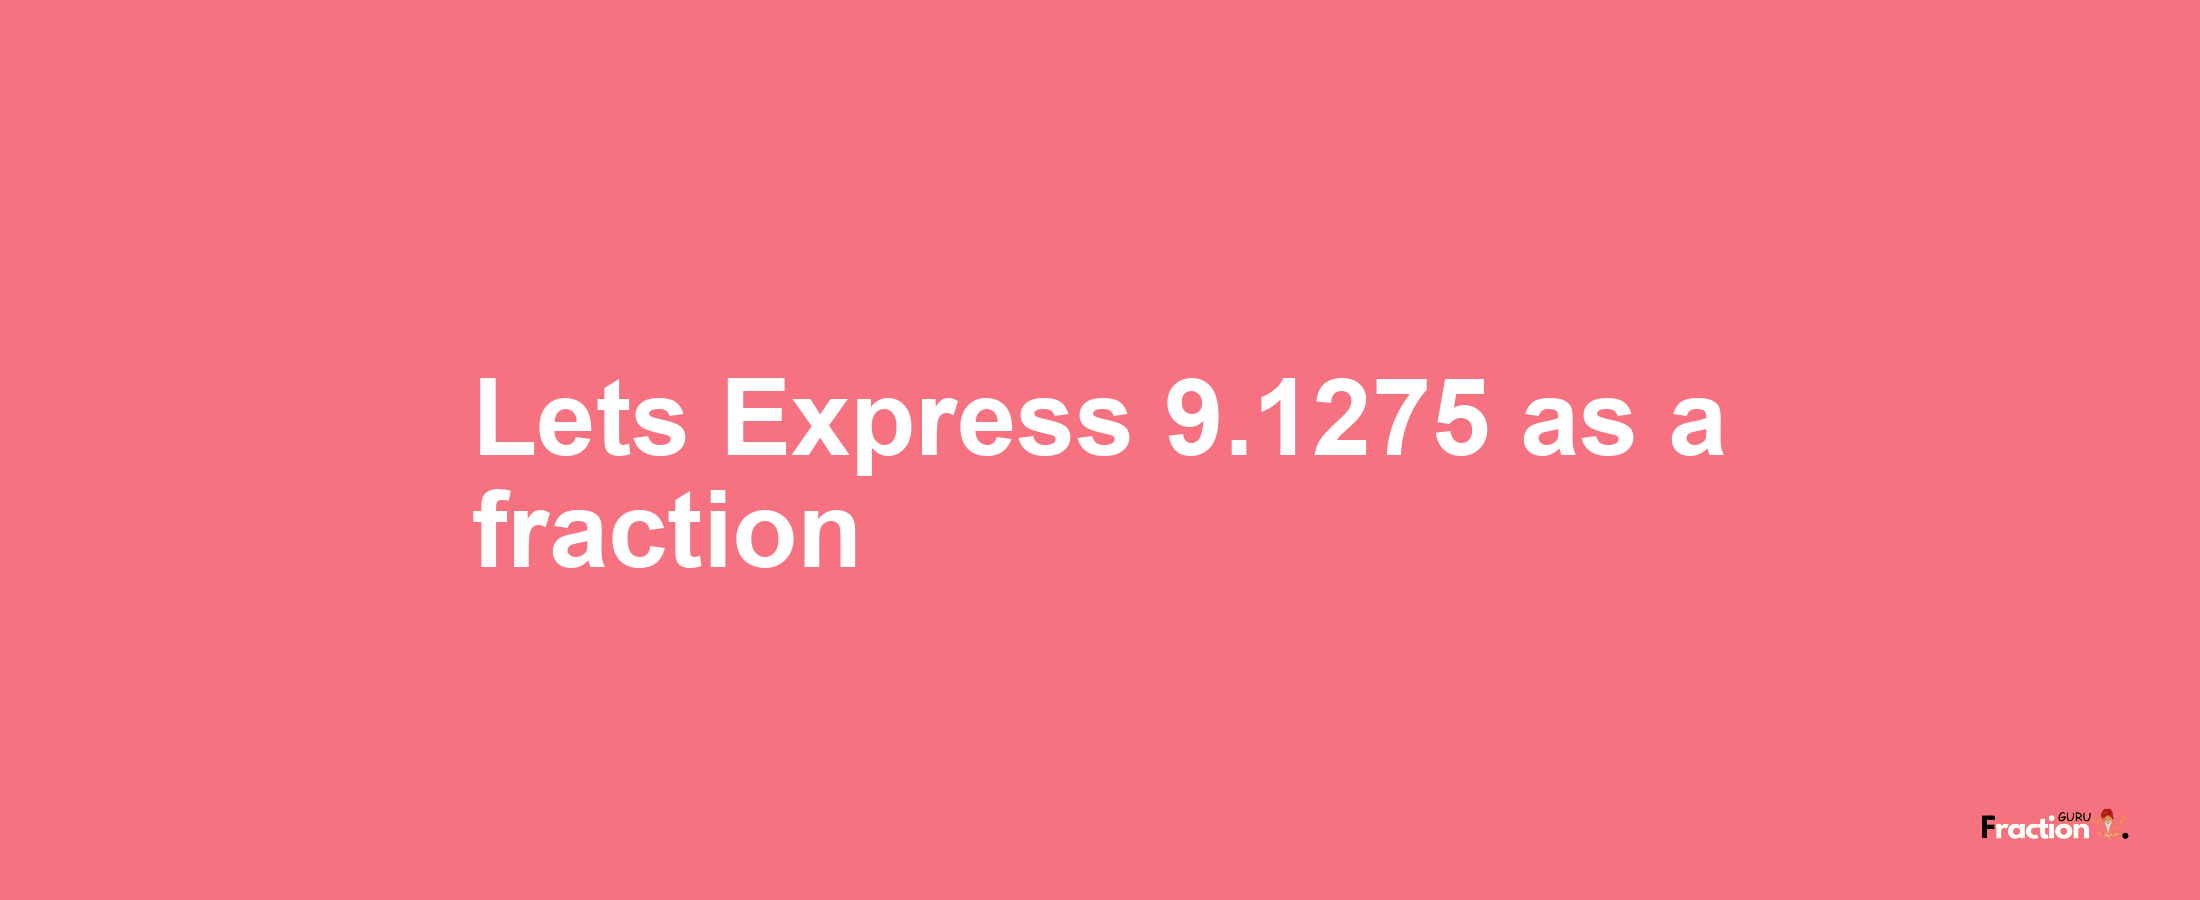 Lets Express 9.1275 as afraction